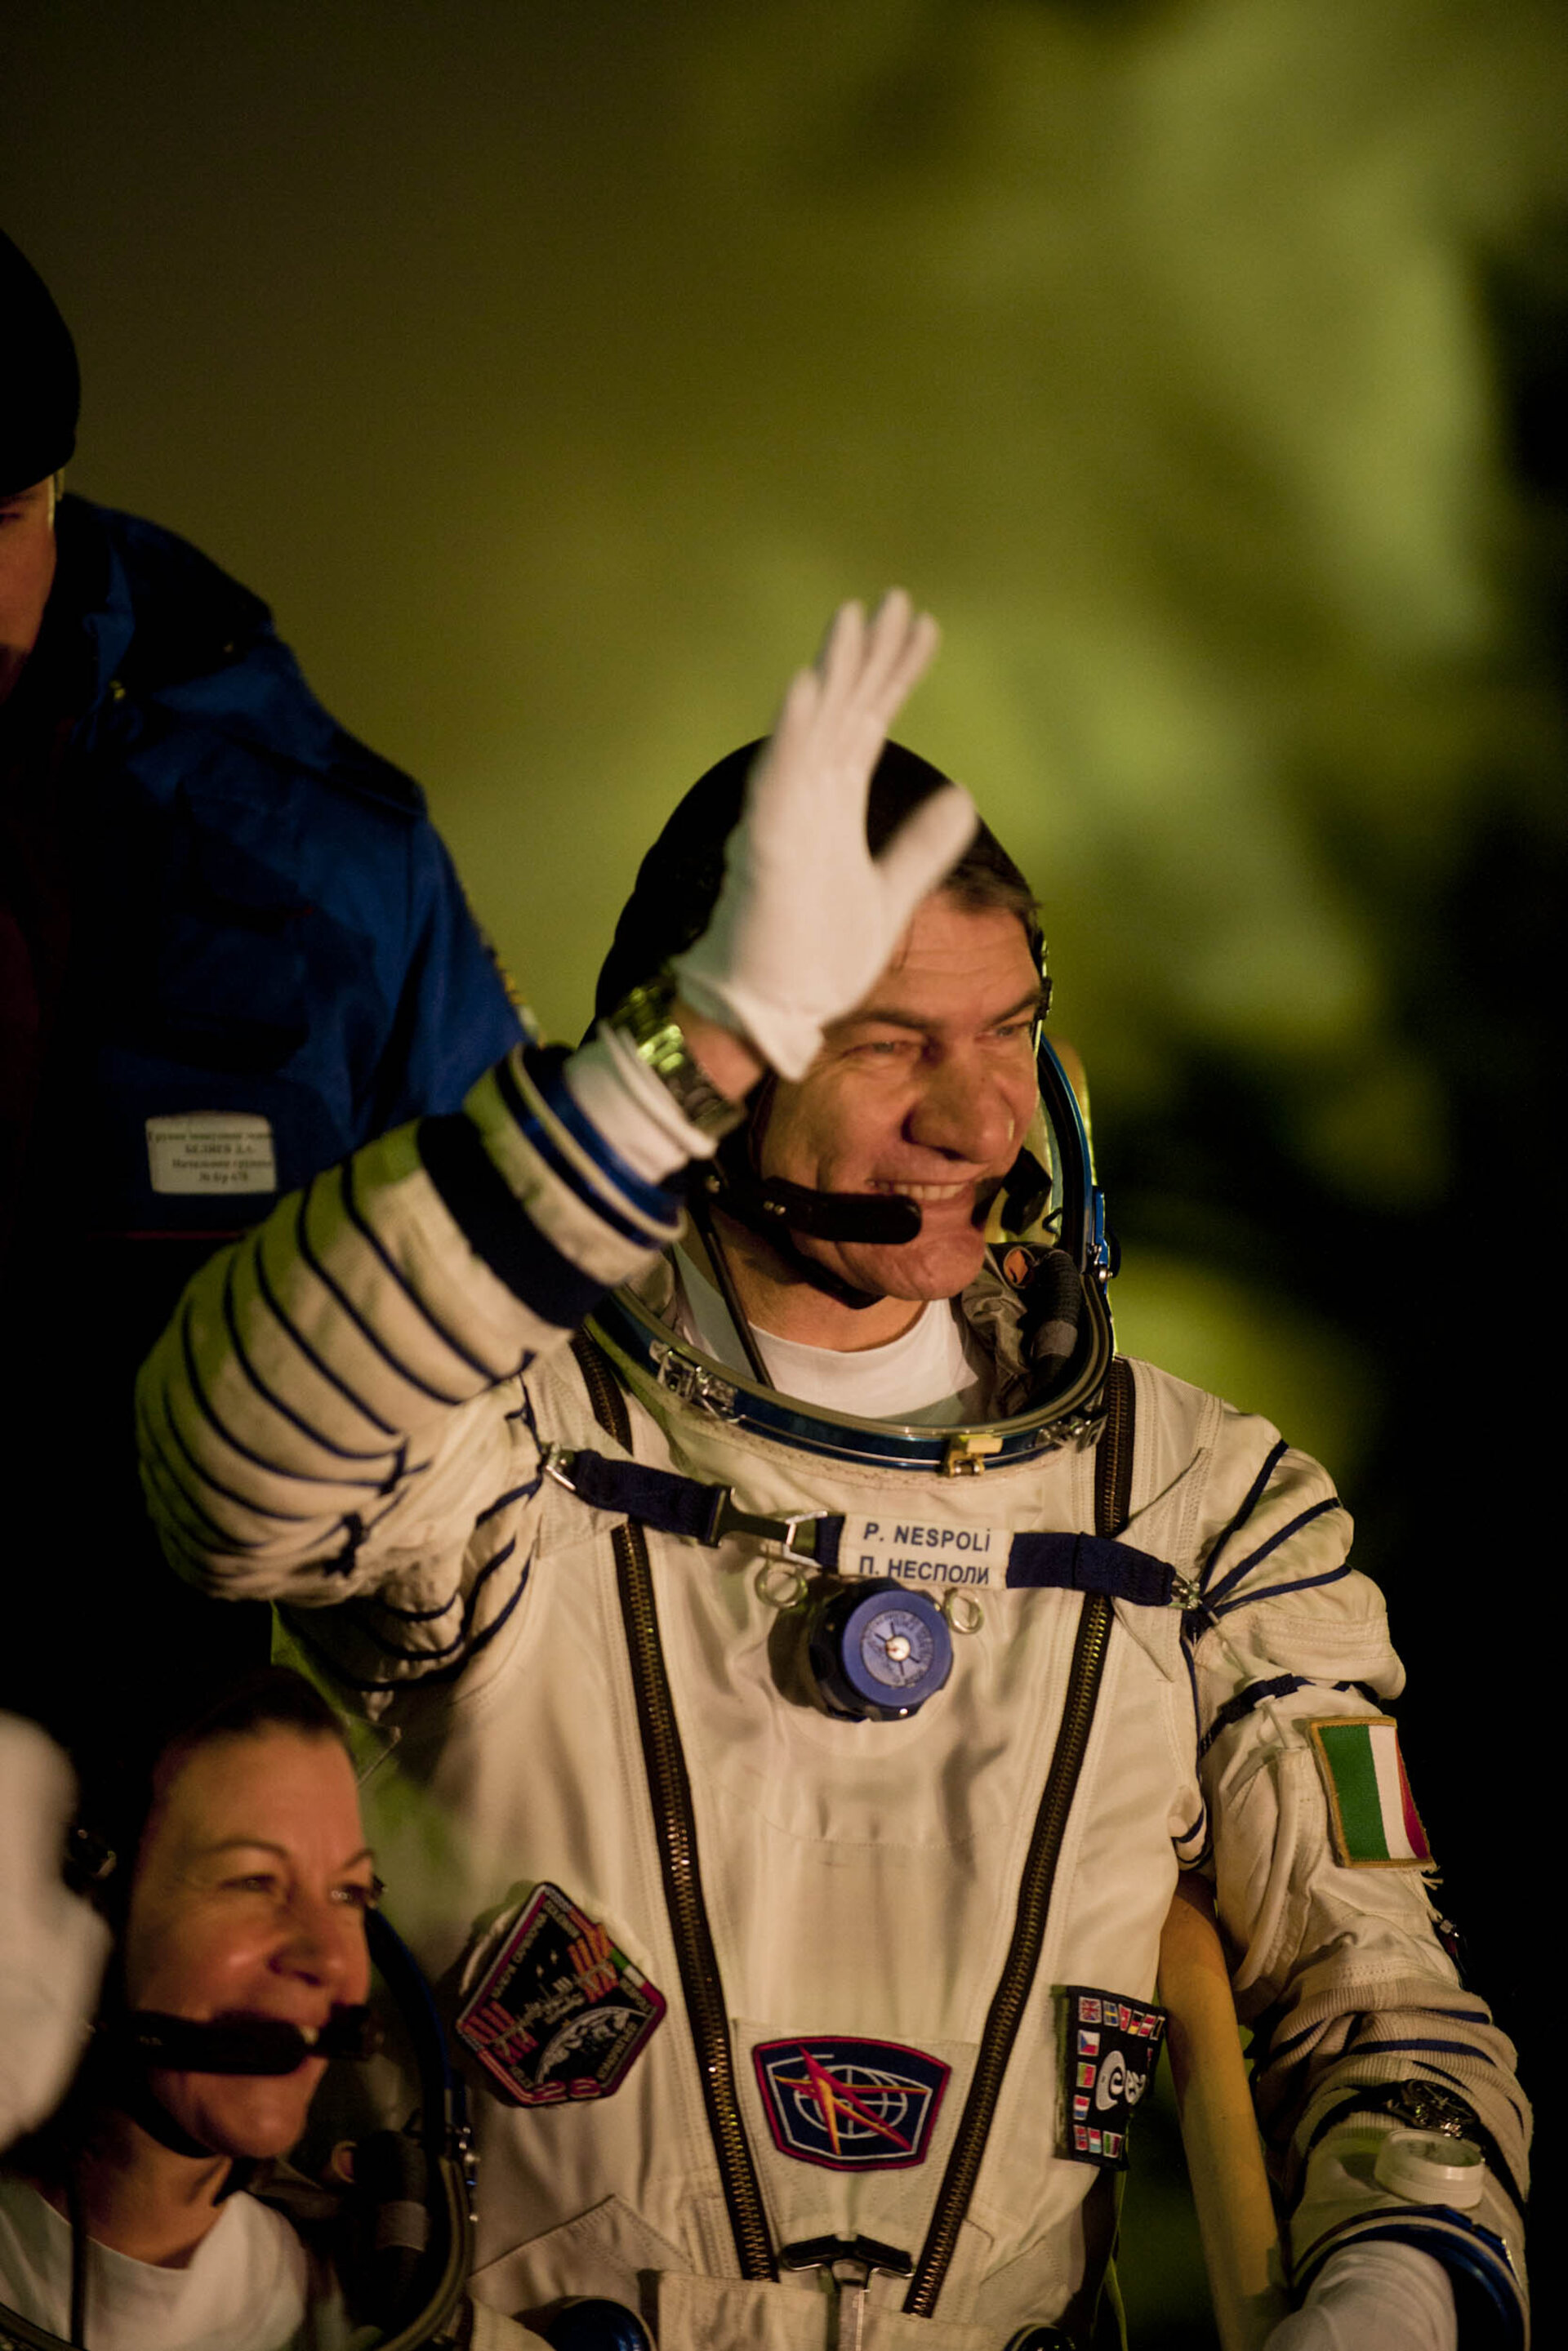 Paolo Nespoli at the launch pad